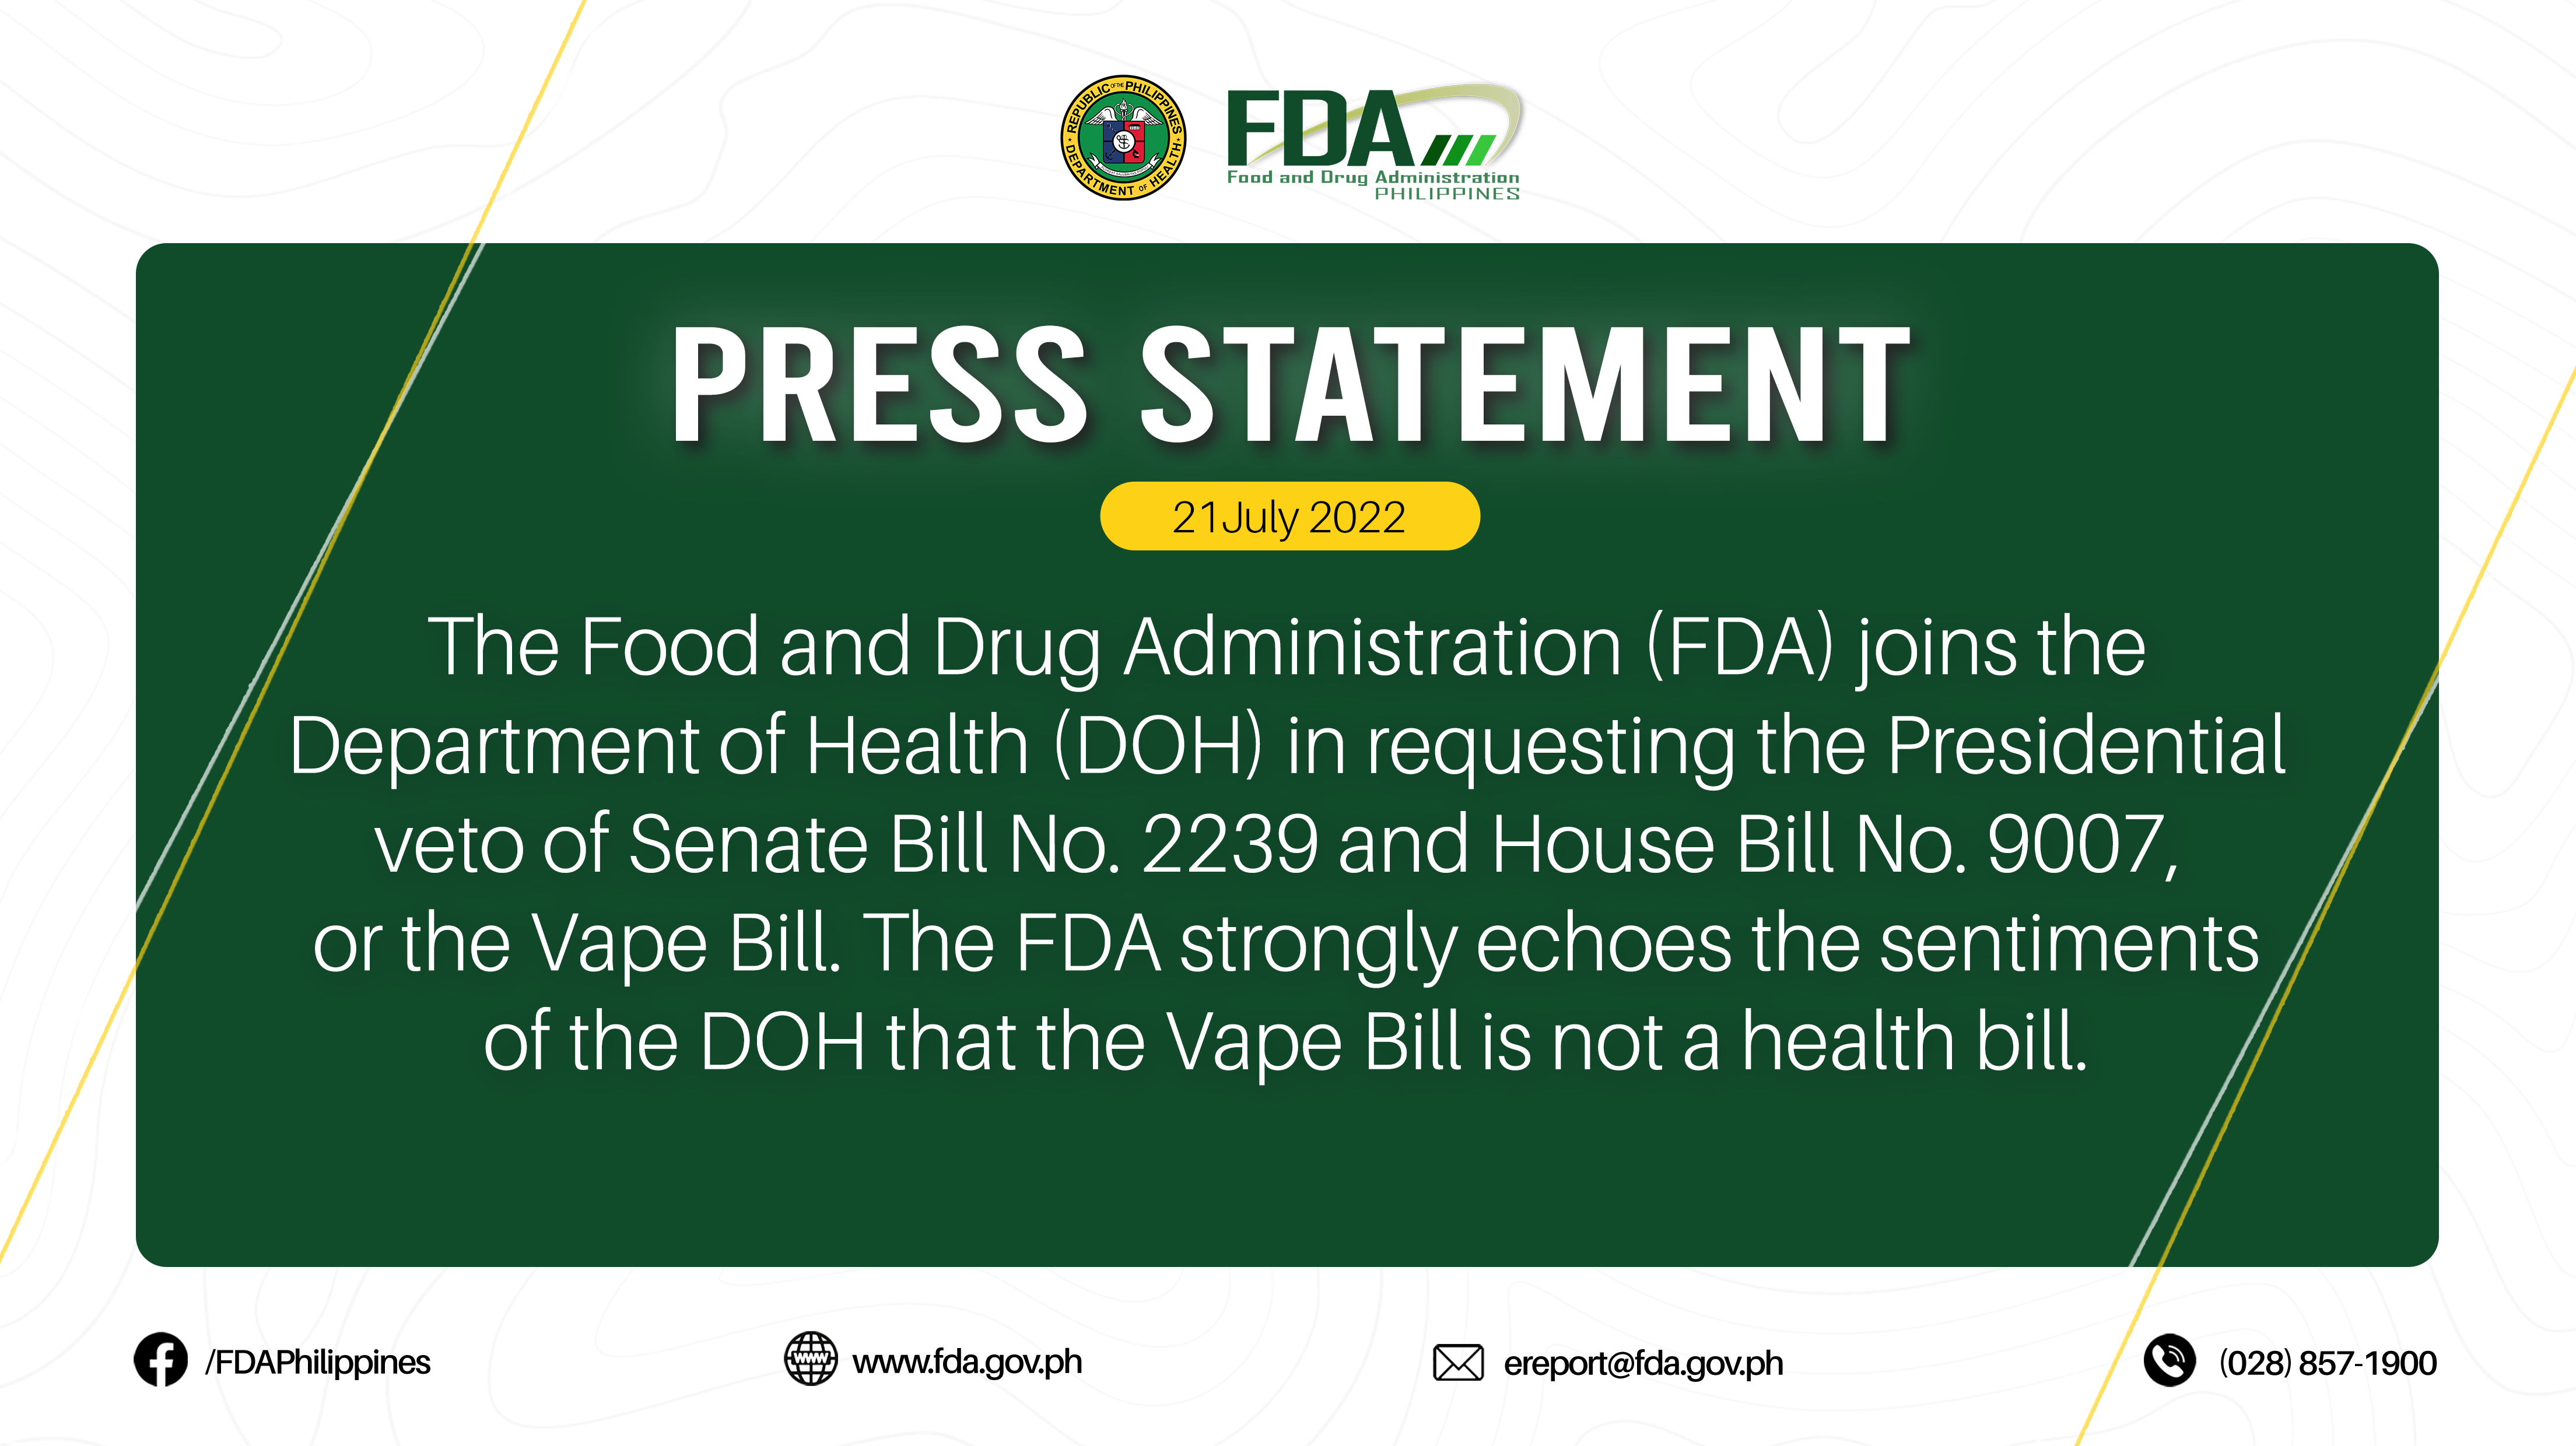 Press Statement ||  The Food and Drug Administration (FDA) joins the Department of Health (DOH) in requesting the Presidential veto of Senate Bill No. 2239 and House Bill No. 9007,  or the Vape Bill. The FDA strongly echoes the sentiments of the DOH that the Vape Bill is not a health bill.